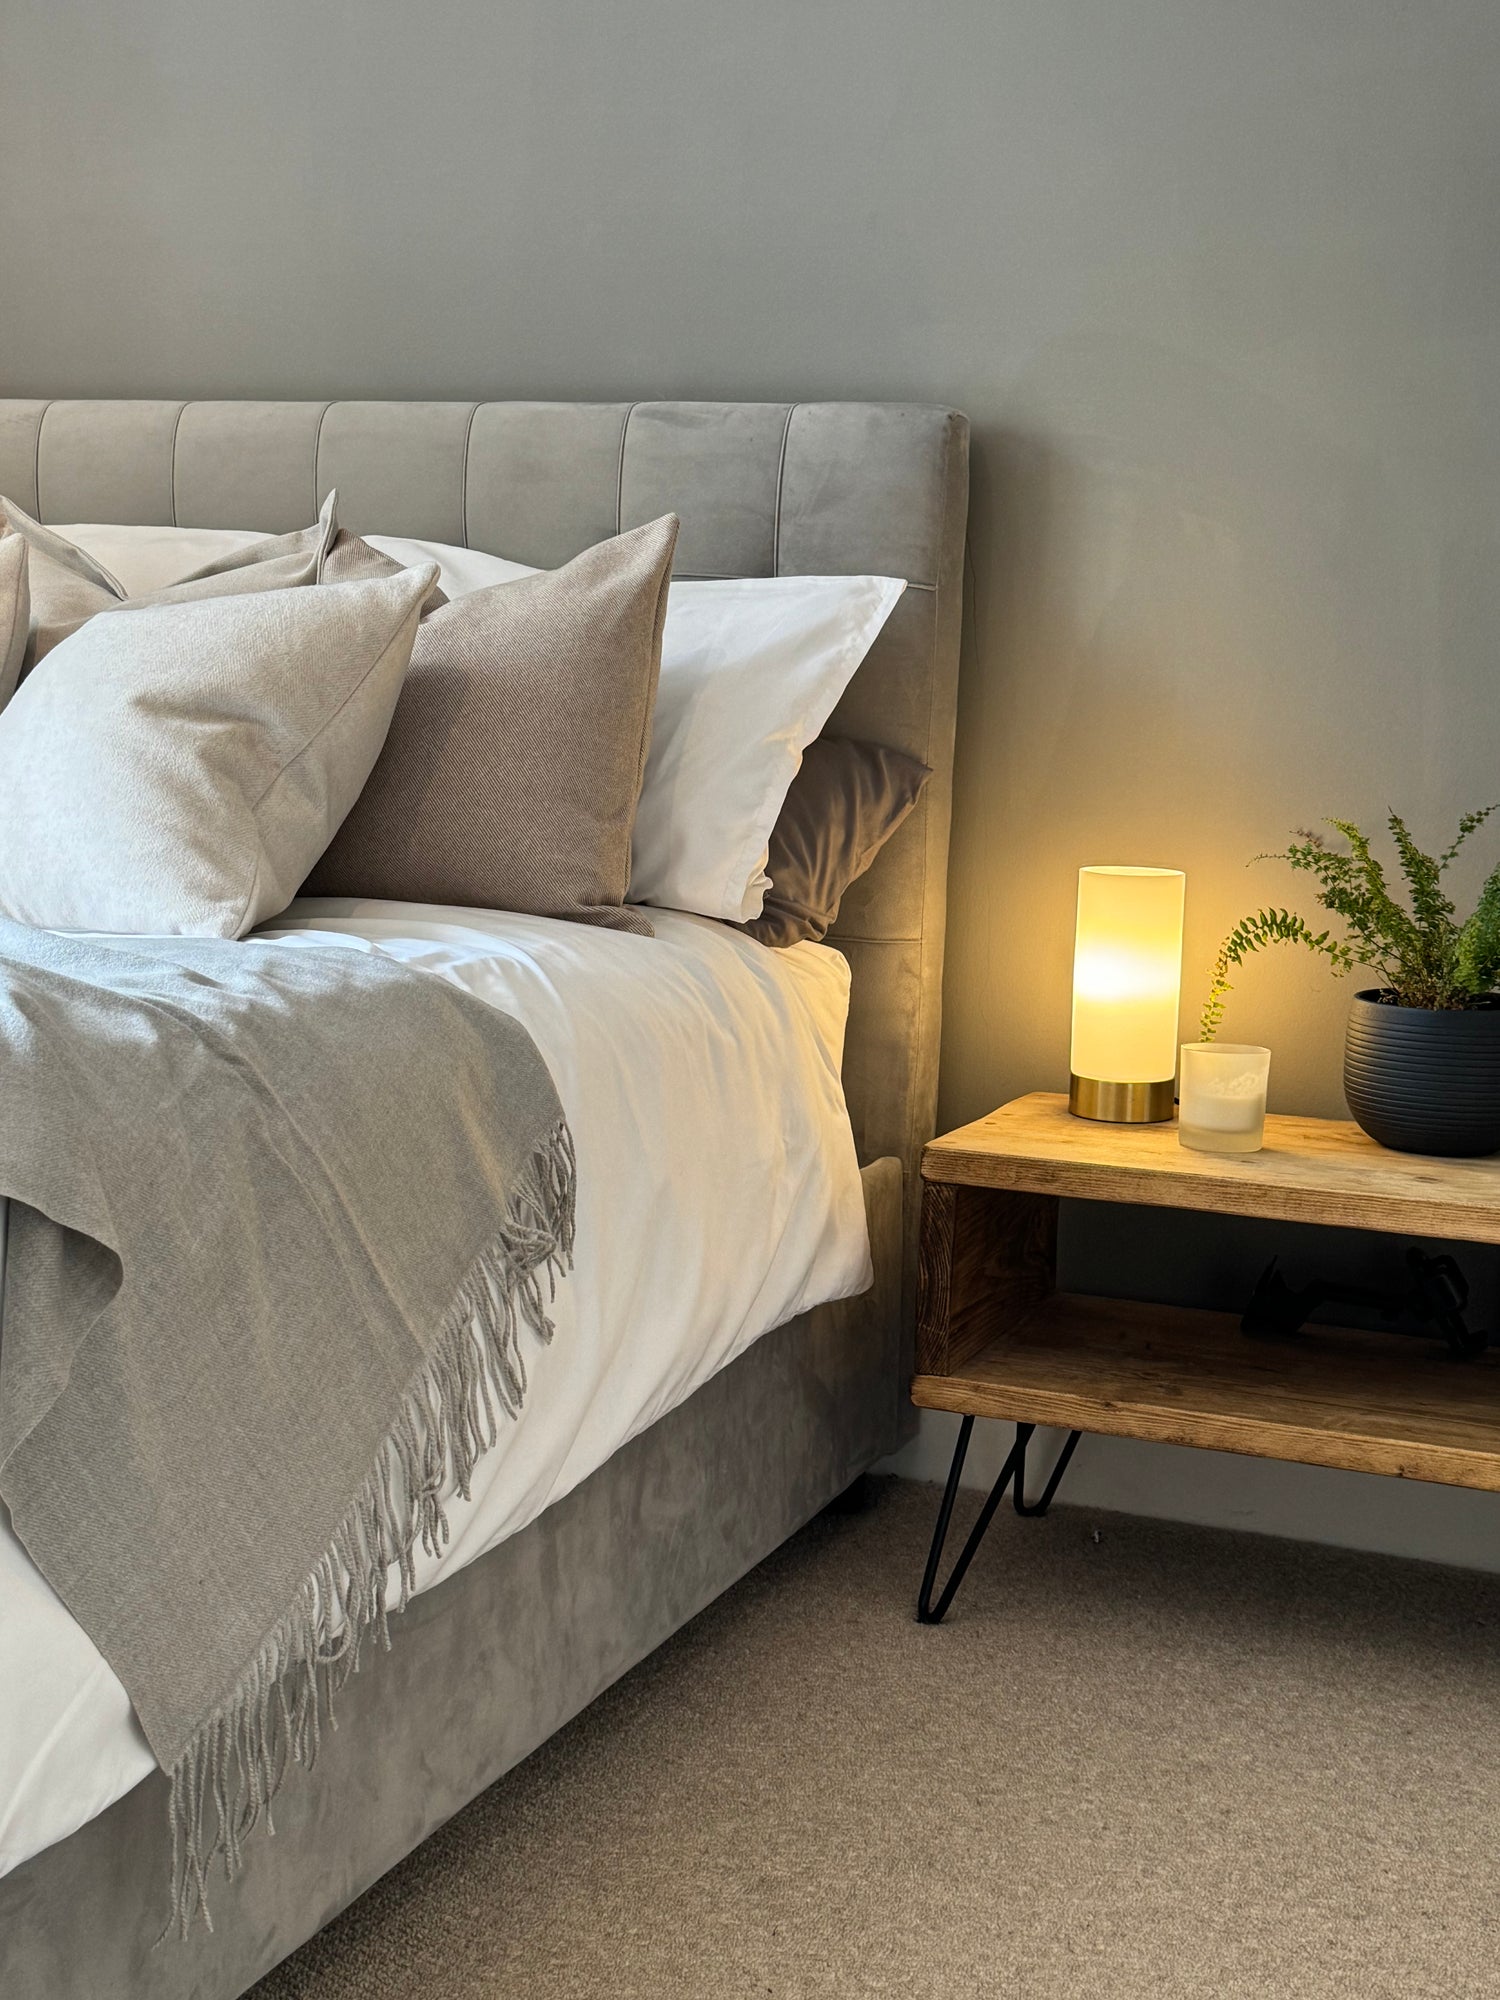 Bed adorned with Mysa Homeware's neutral luxury cushions, adding elegance and comfort to the bedroom decor.